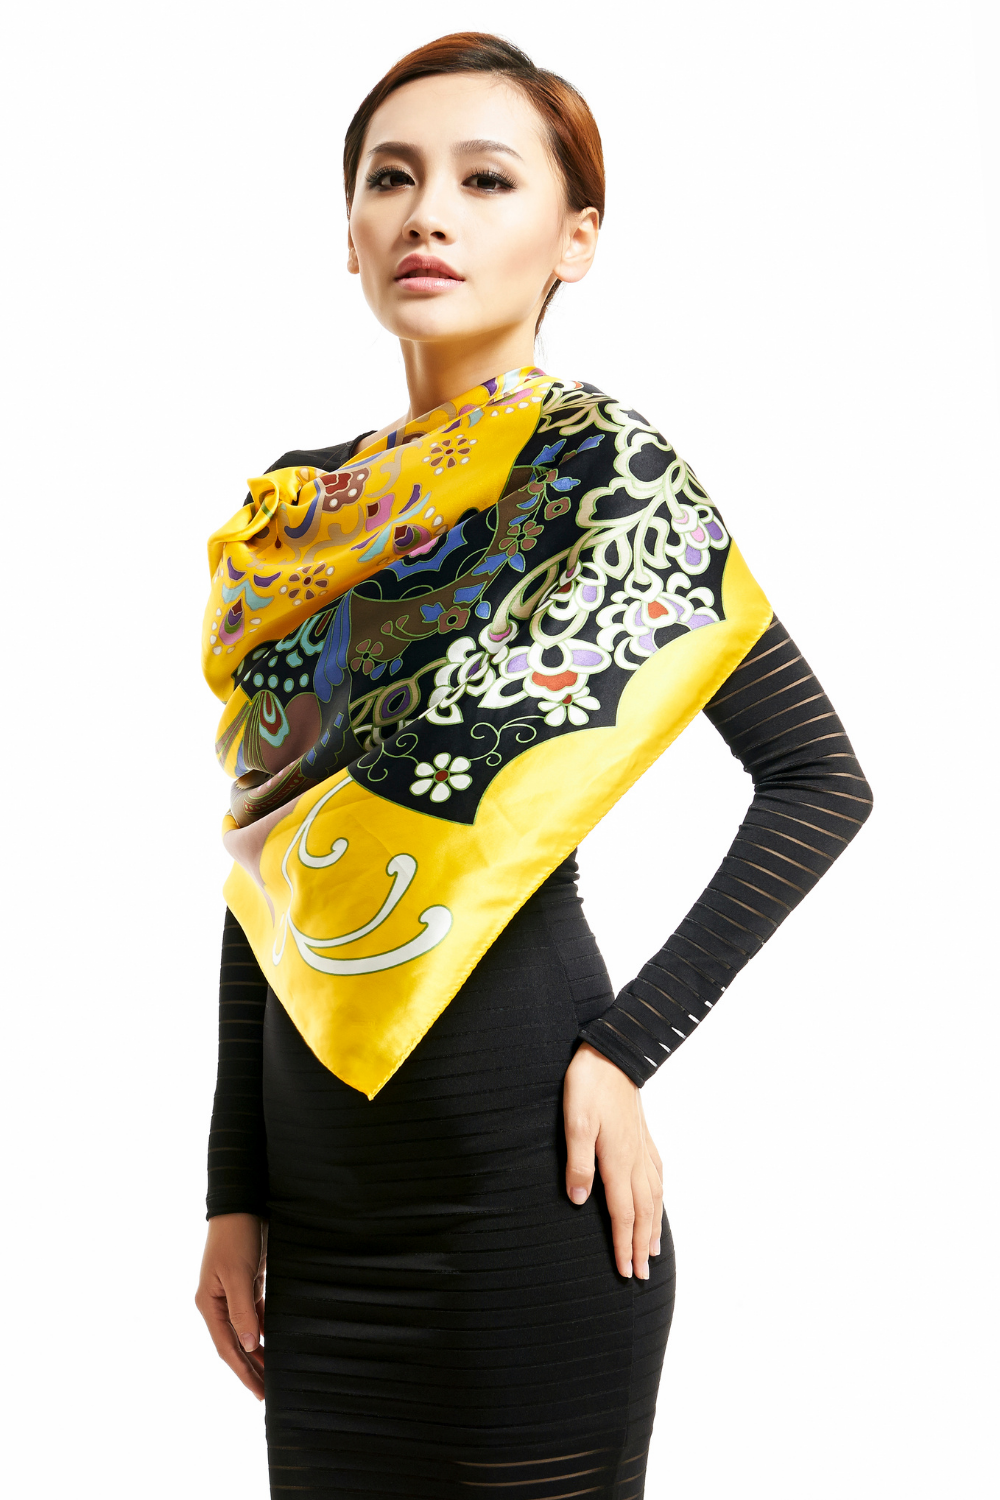 asian model wearing colorful scarf draped over black dress